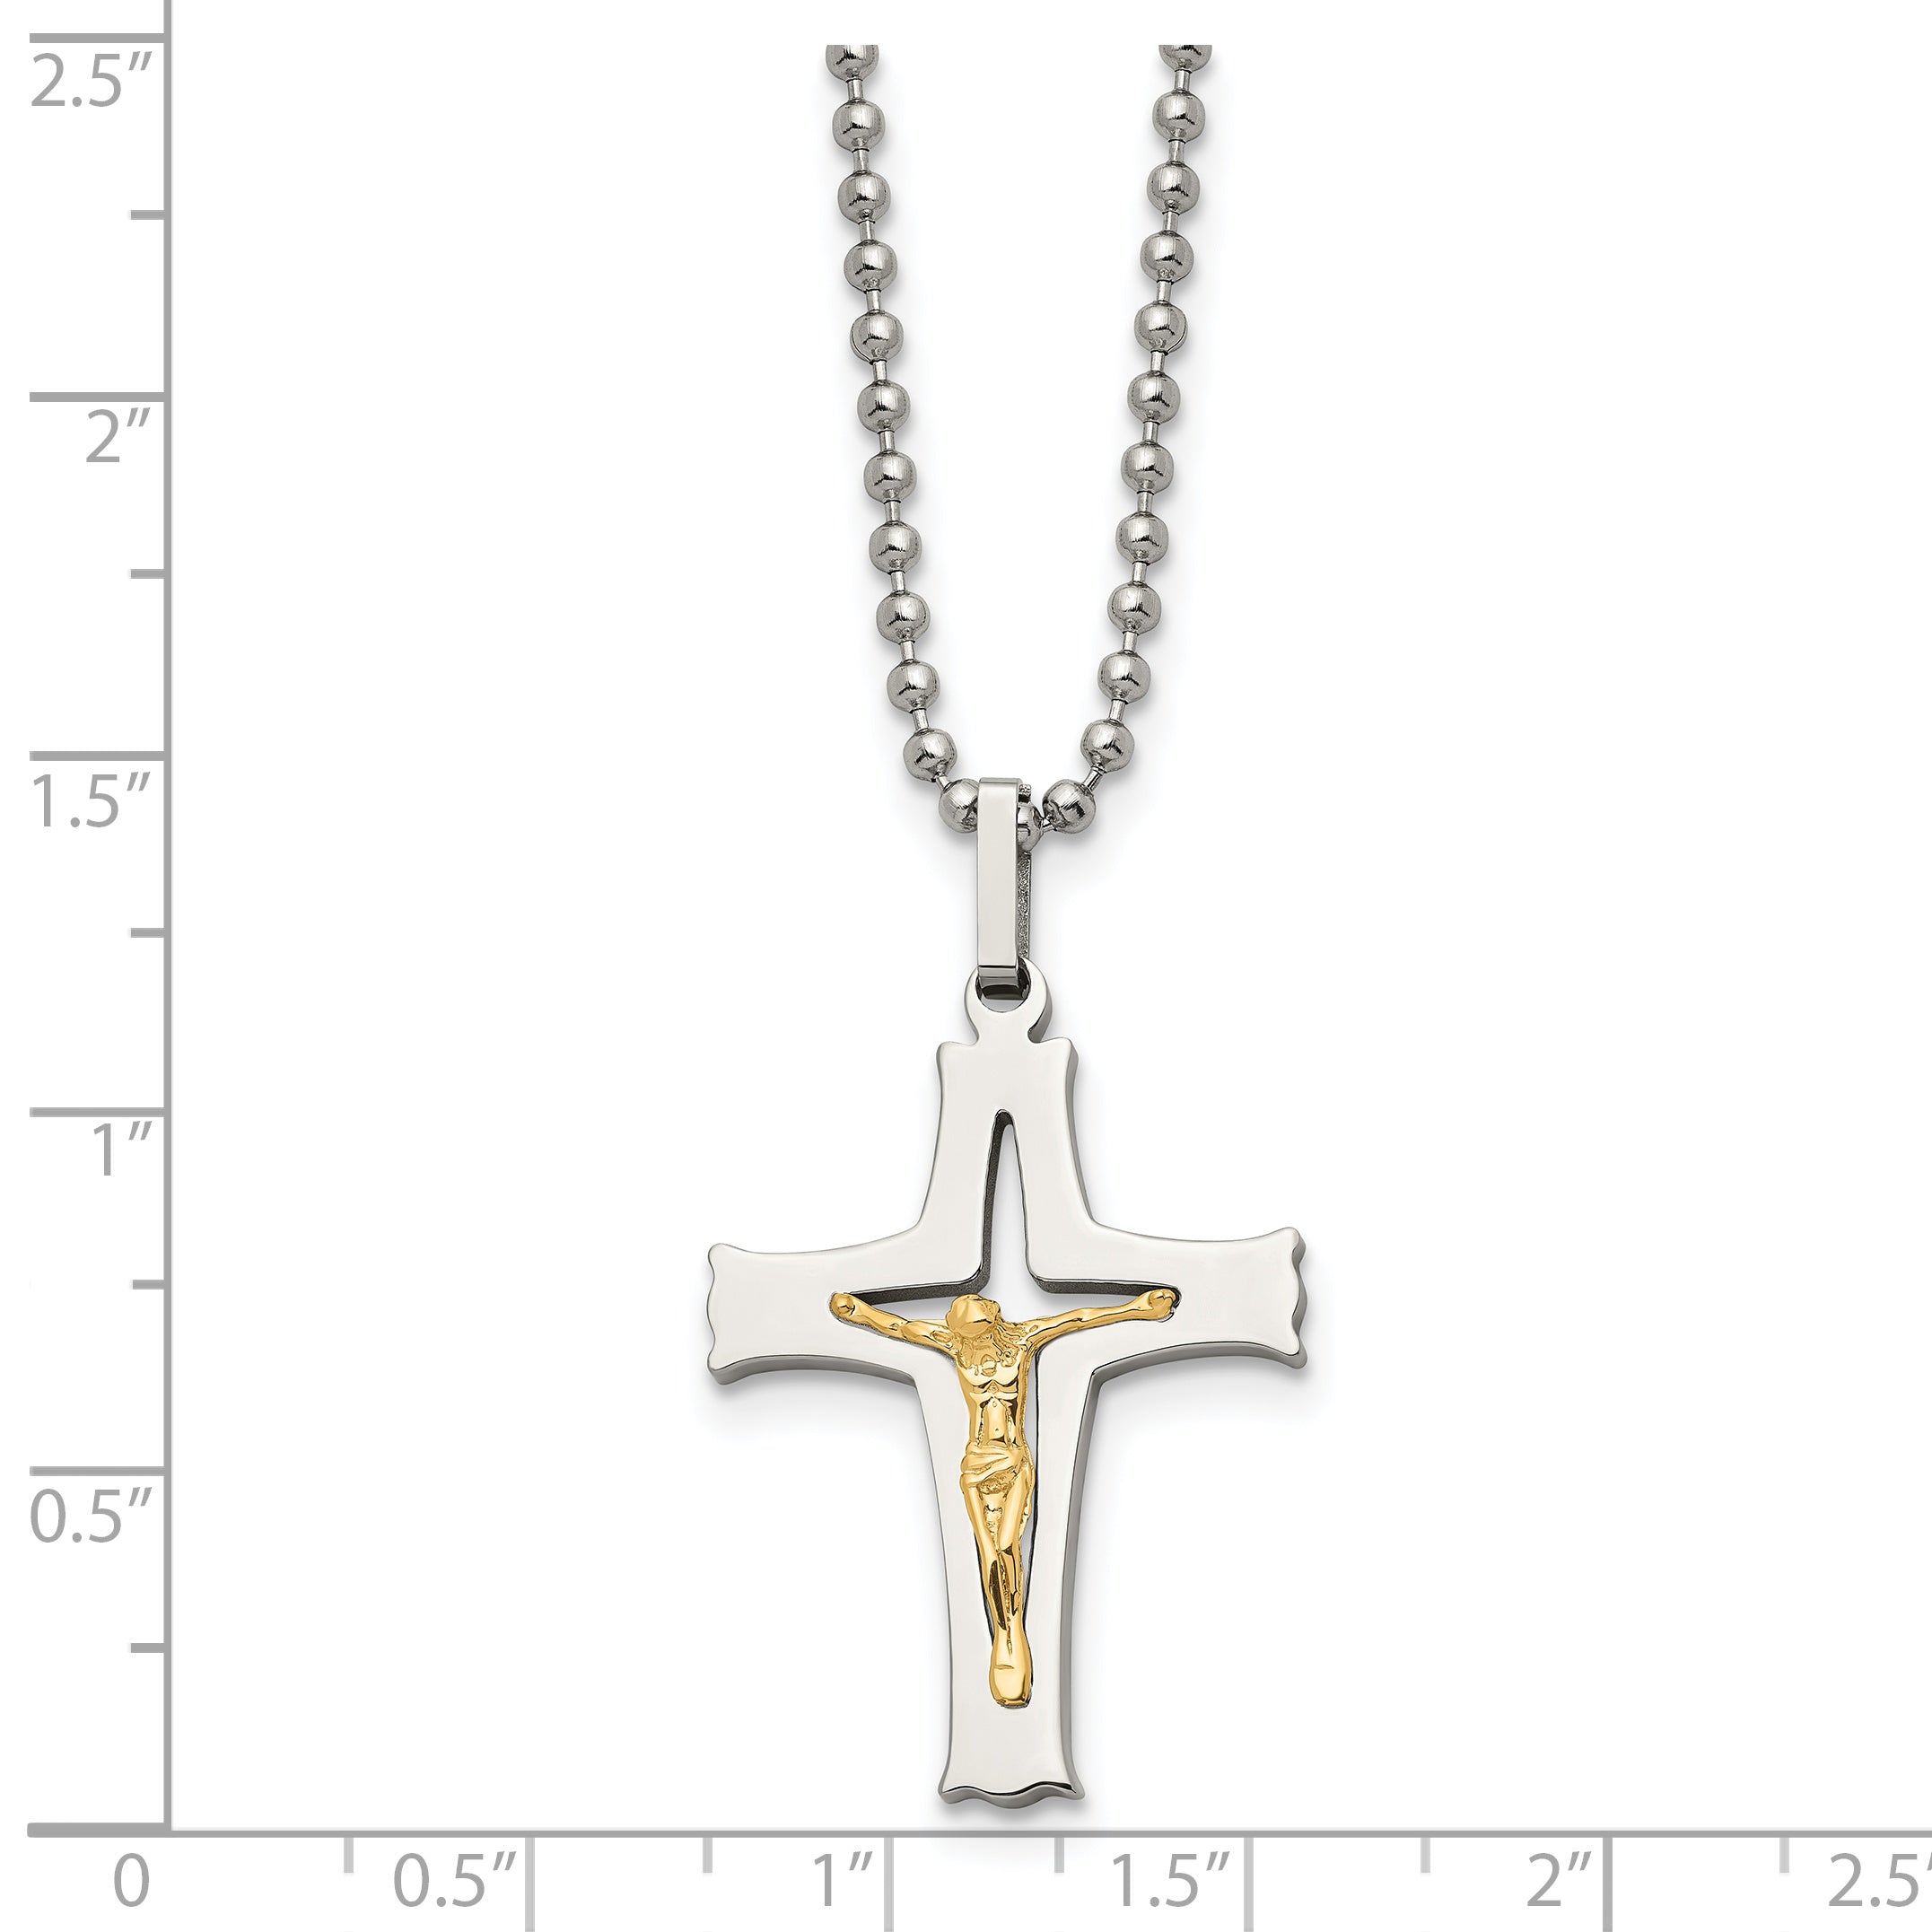 Chisel Stainless Steel Polished with 14k Gold Accent Crucifix Pendant on a 22 inch Ball Chain Necklace